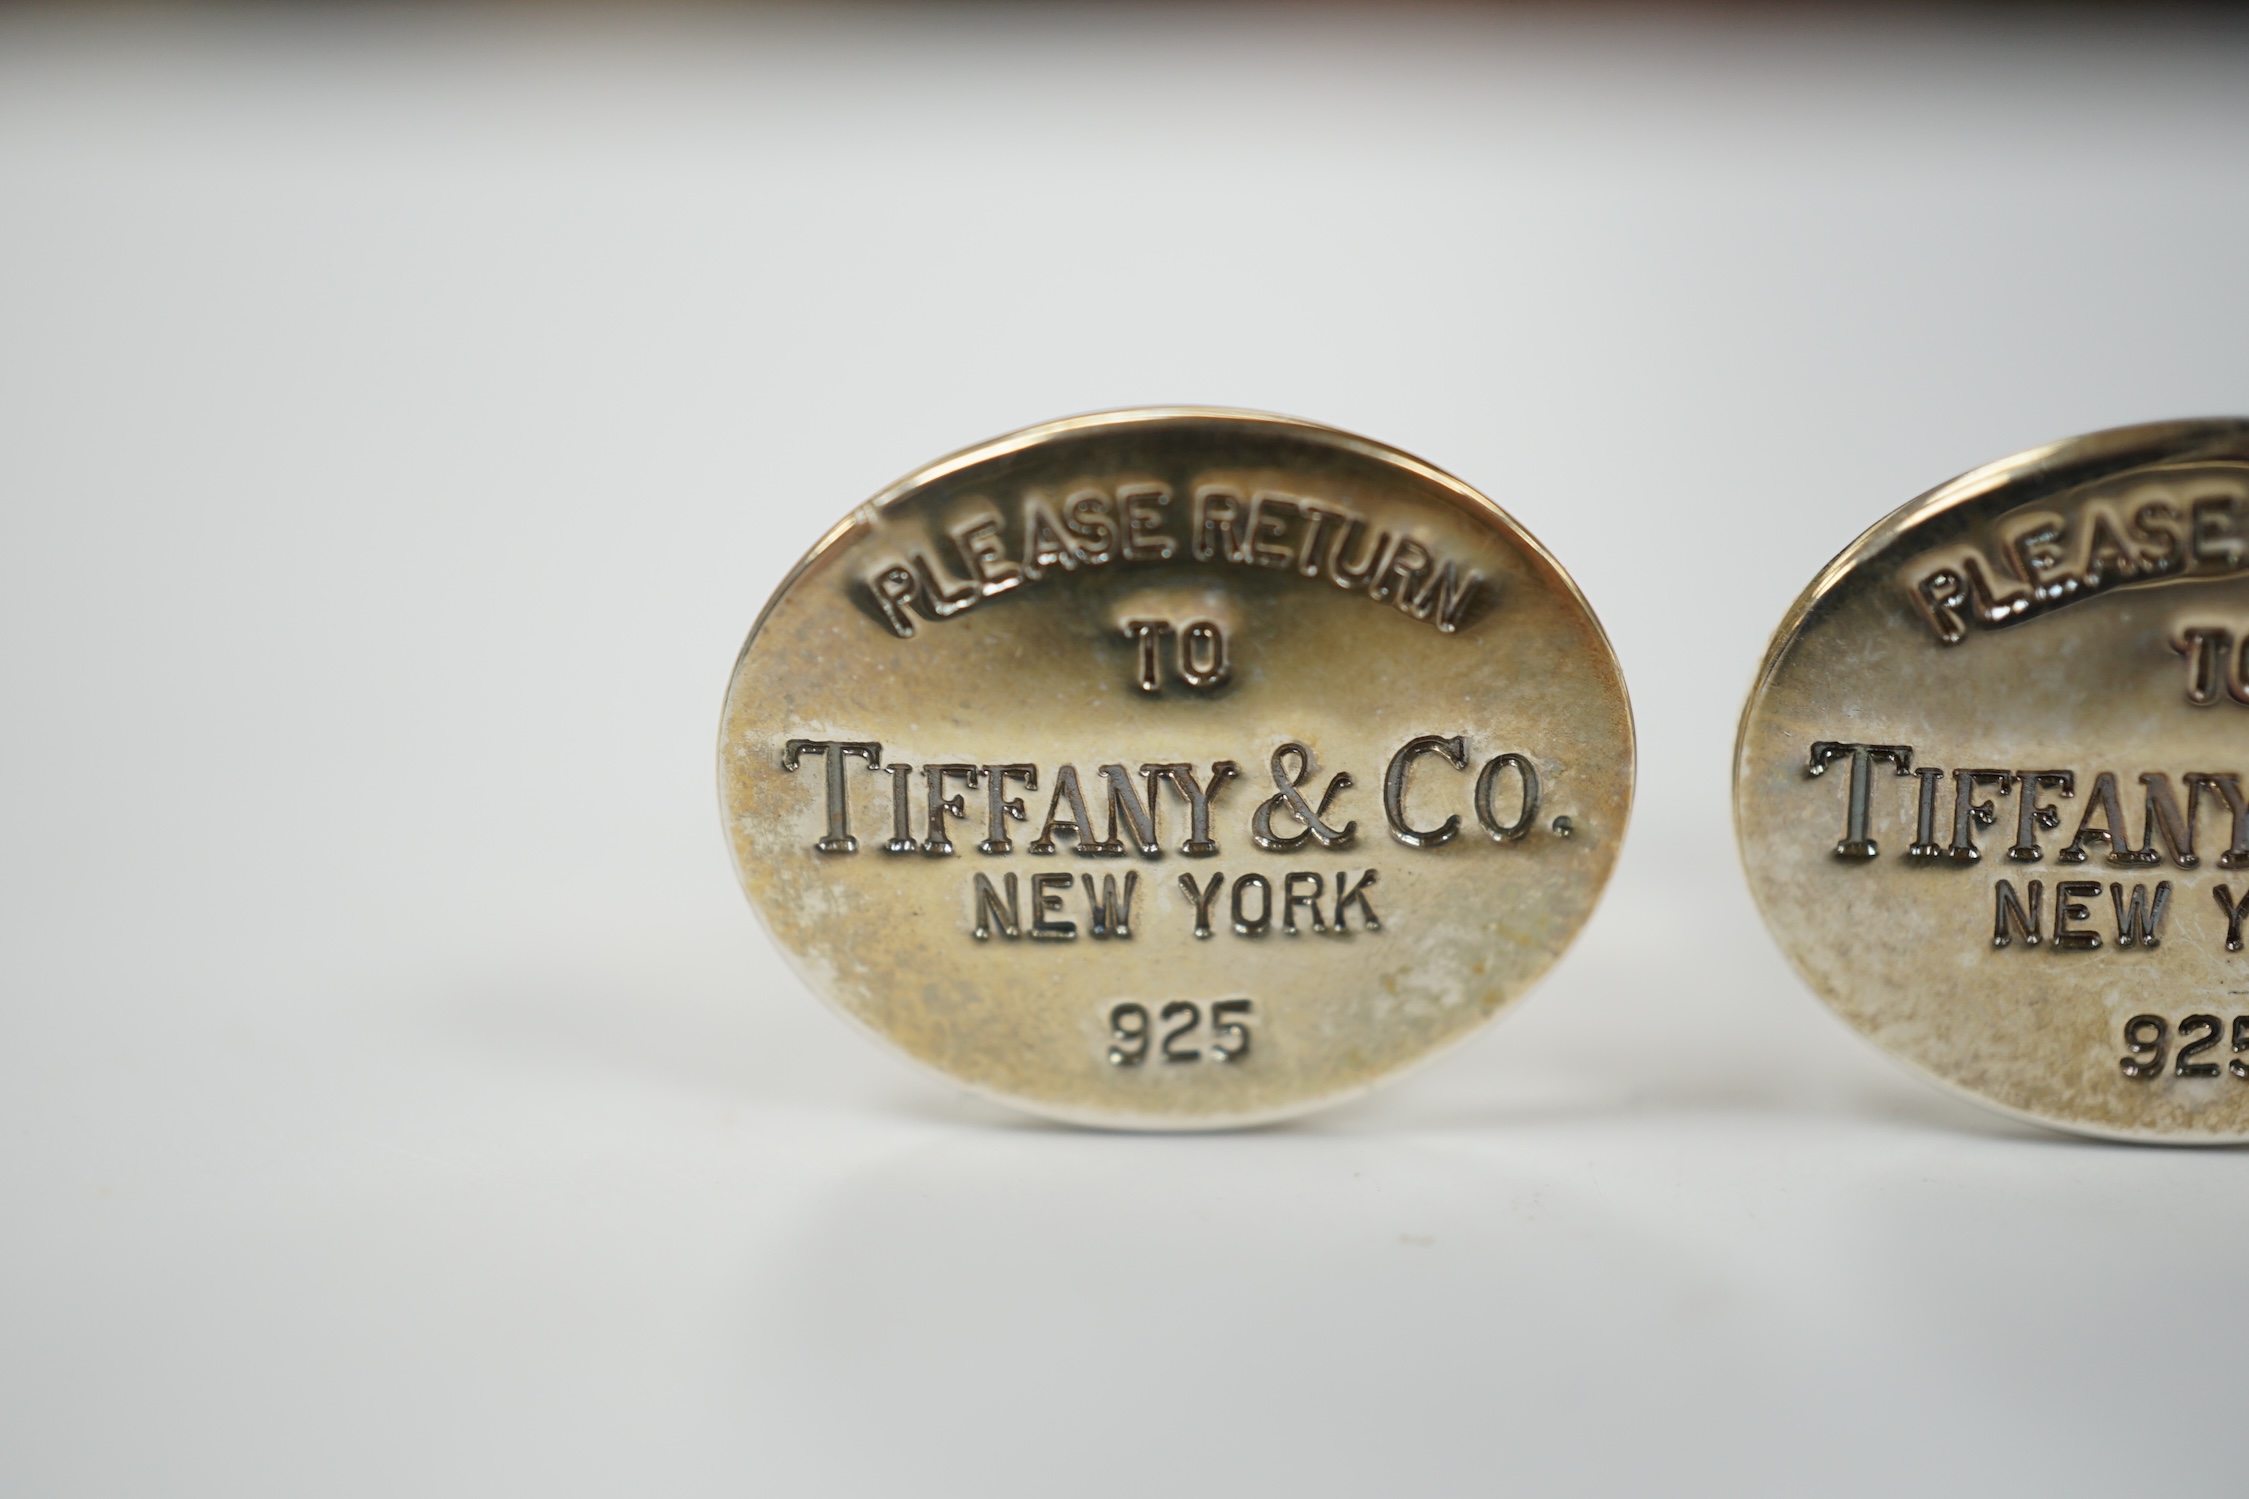 A modern pair of Tiffany & Co gilt 925 oval cufflinks, 19mm, with pouch and box.